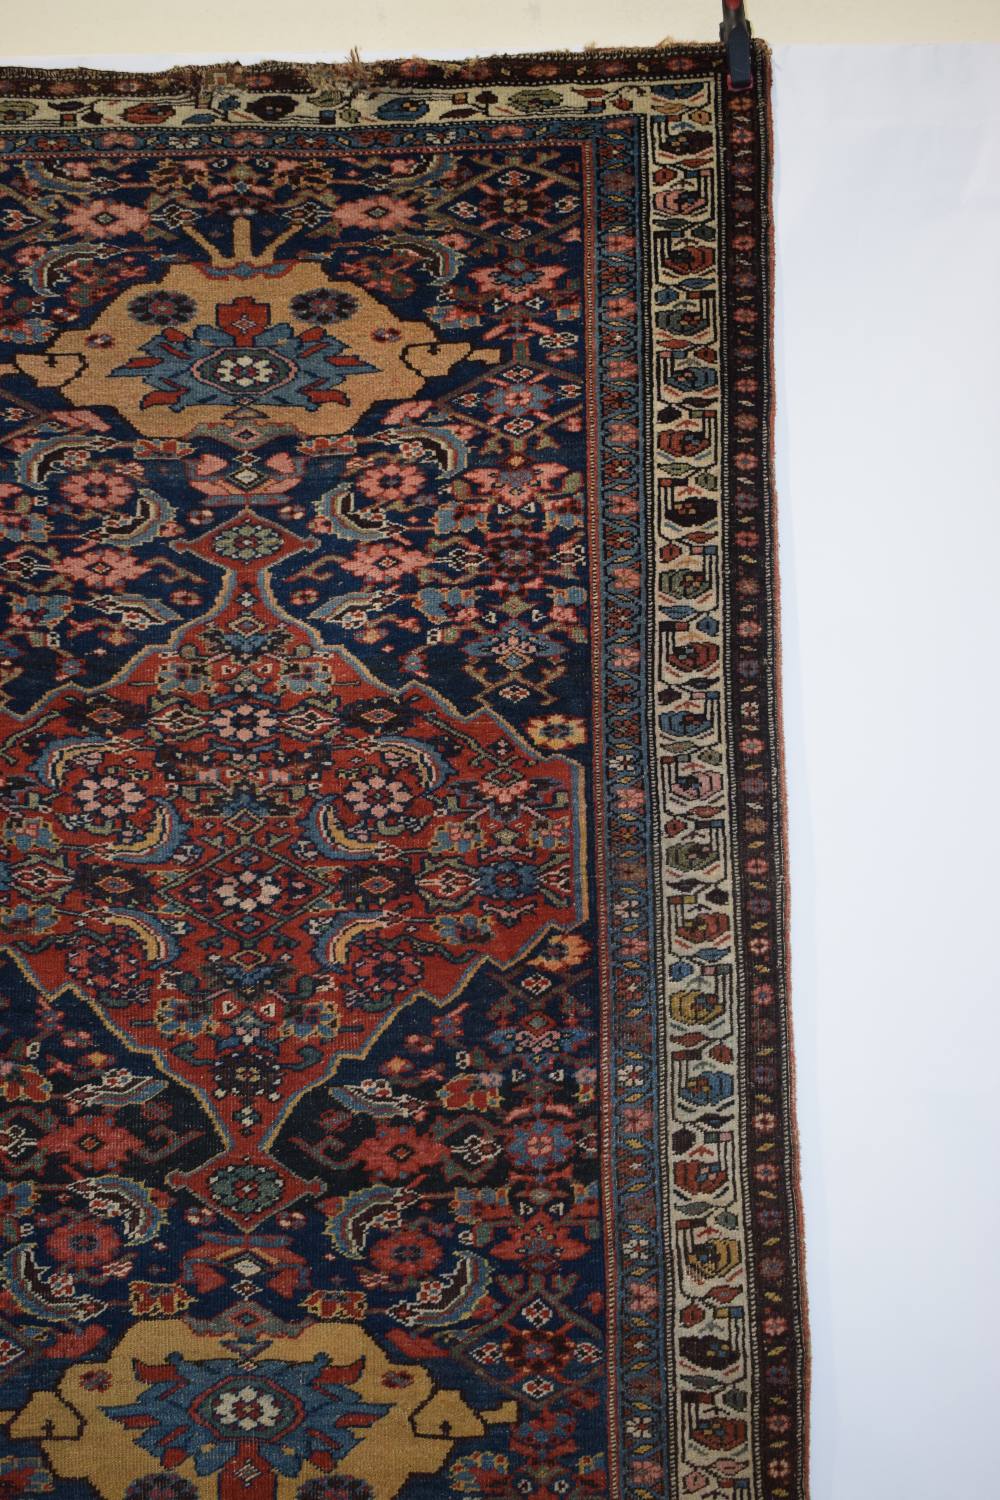 Bijar rug, north west Persia, circa 1920s, 6ft. 7in. x 4ft. 2.01m. x 1.22m. Overall wear; crude - Image 3 of 12